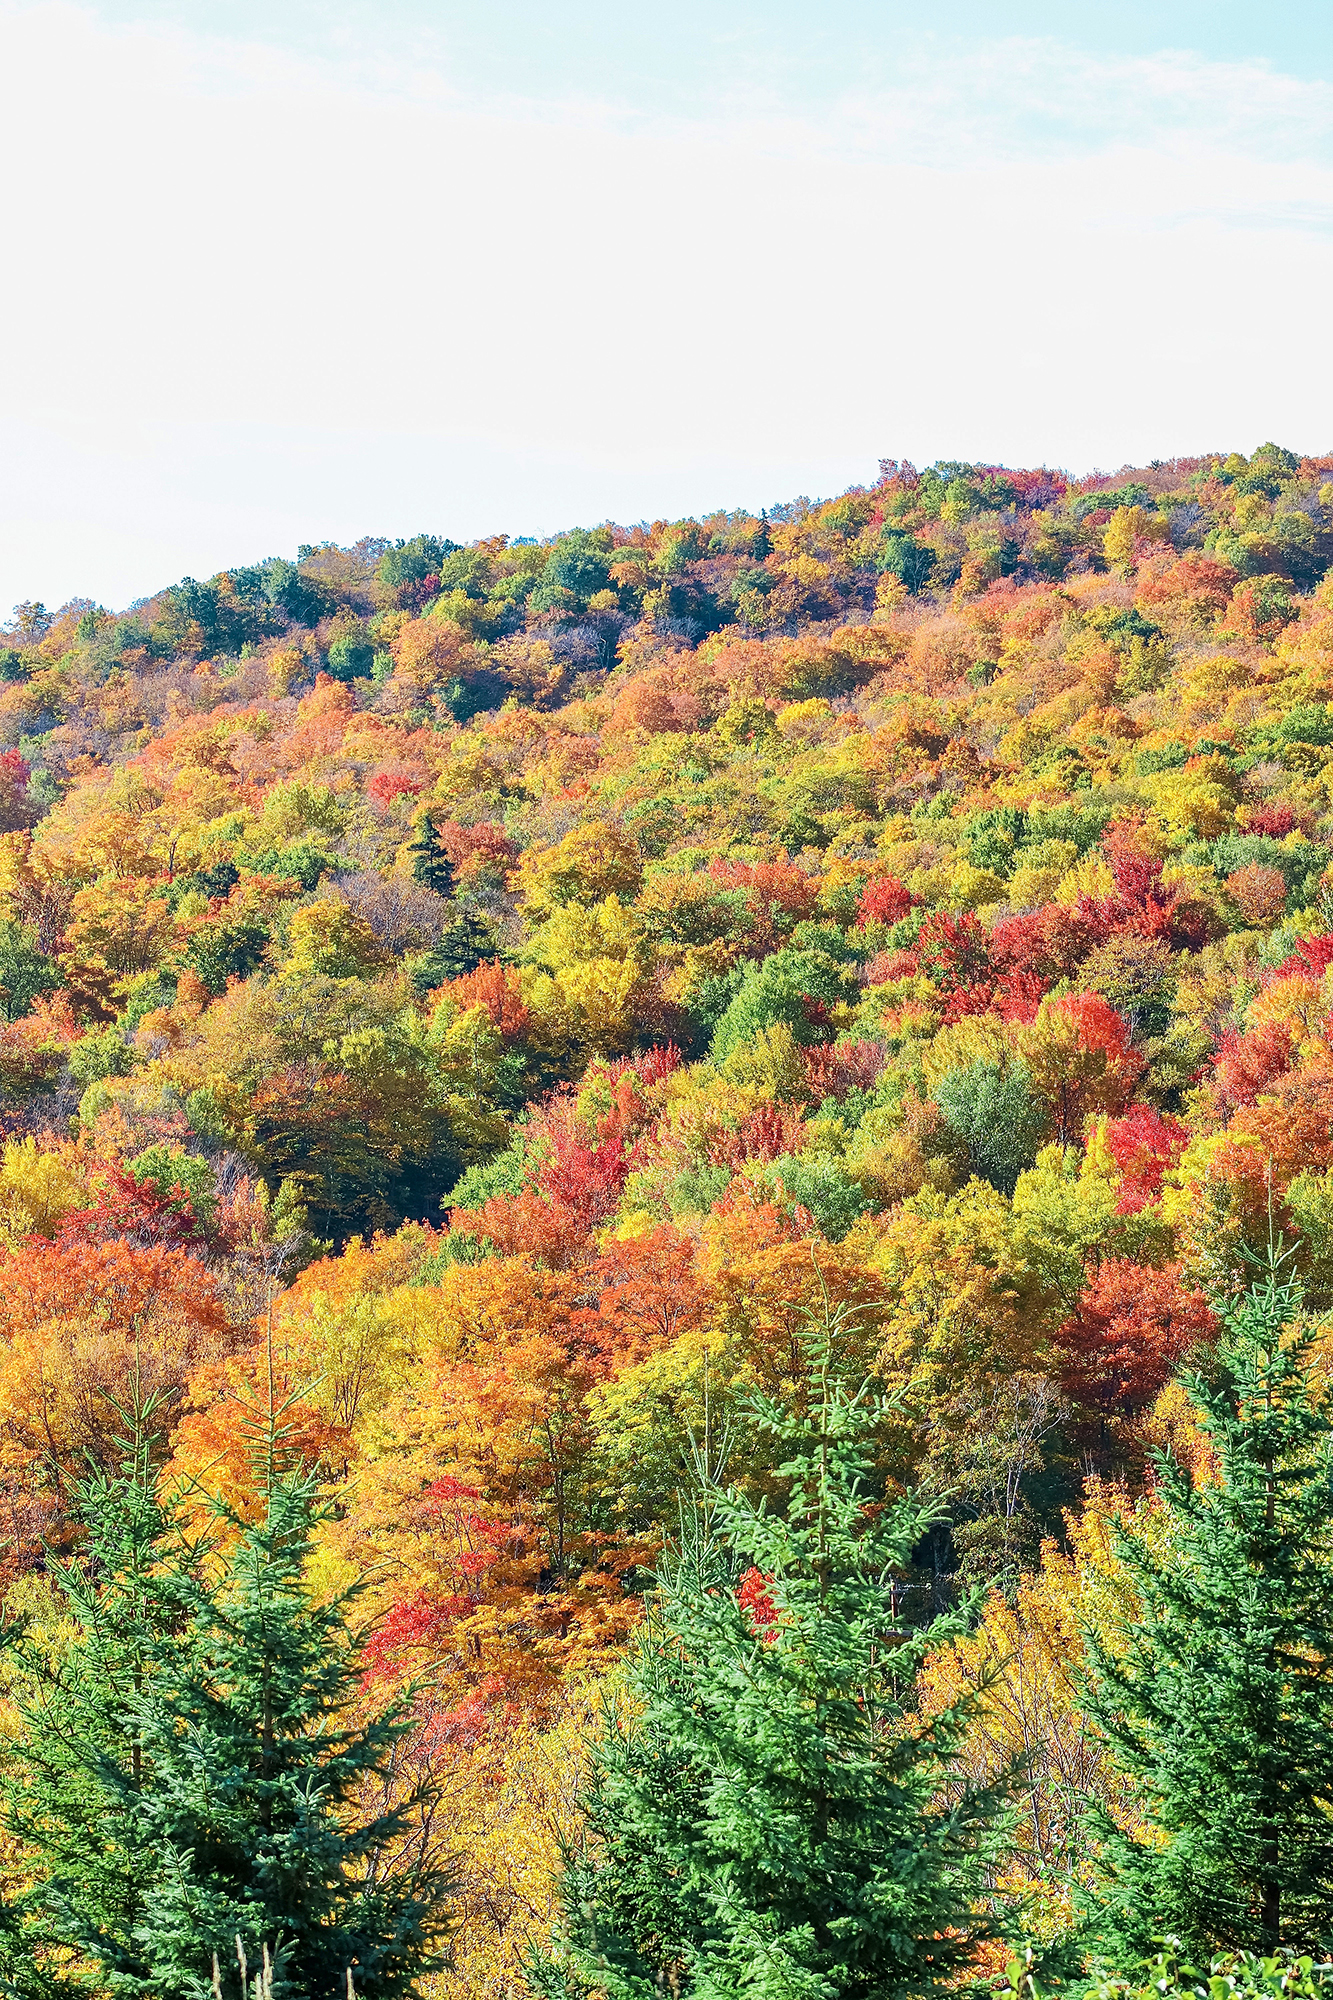 Vermont Fall Travel Guide | Fall Foliage guide, best inns & hotels, top restaurants to eat at, and all the cute towns/places to stop along the way!